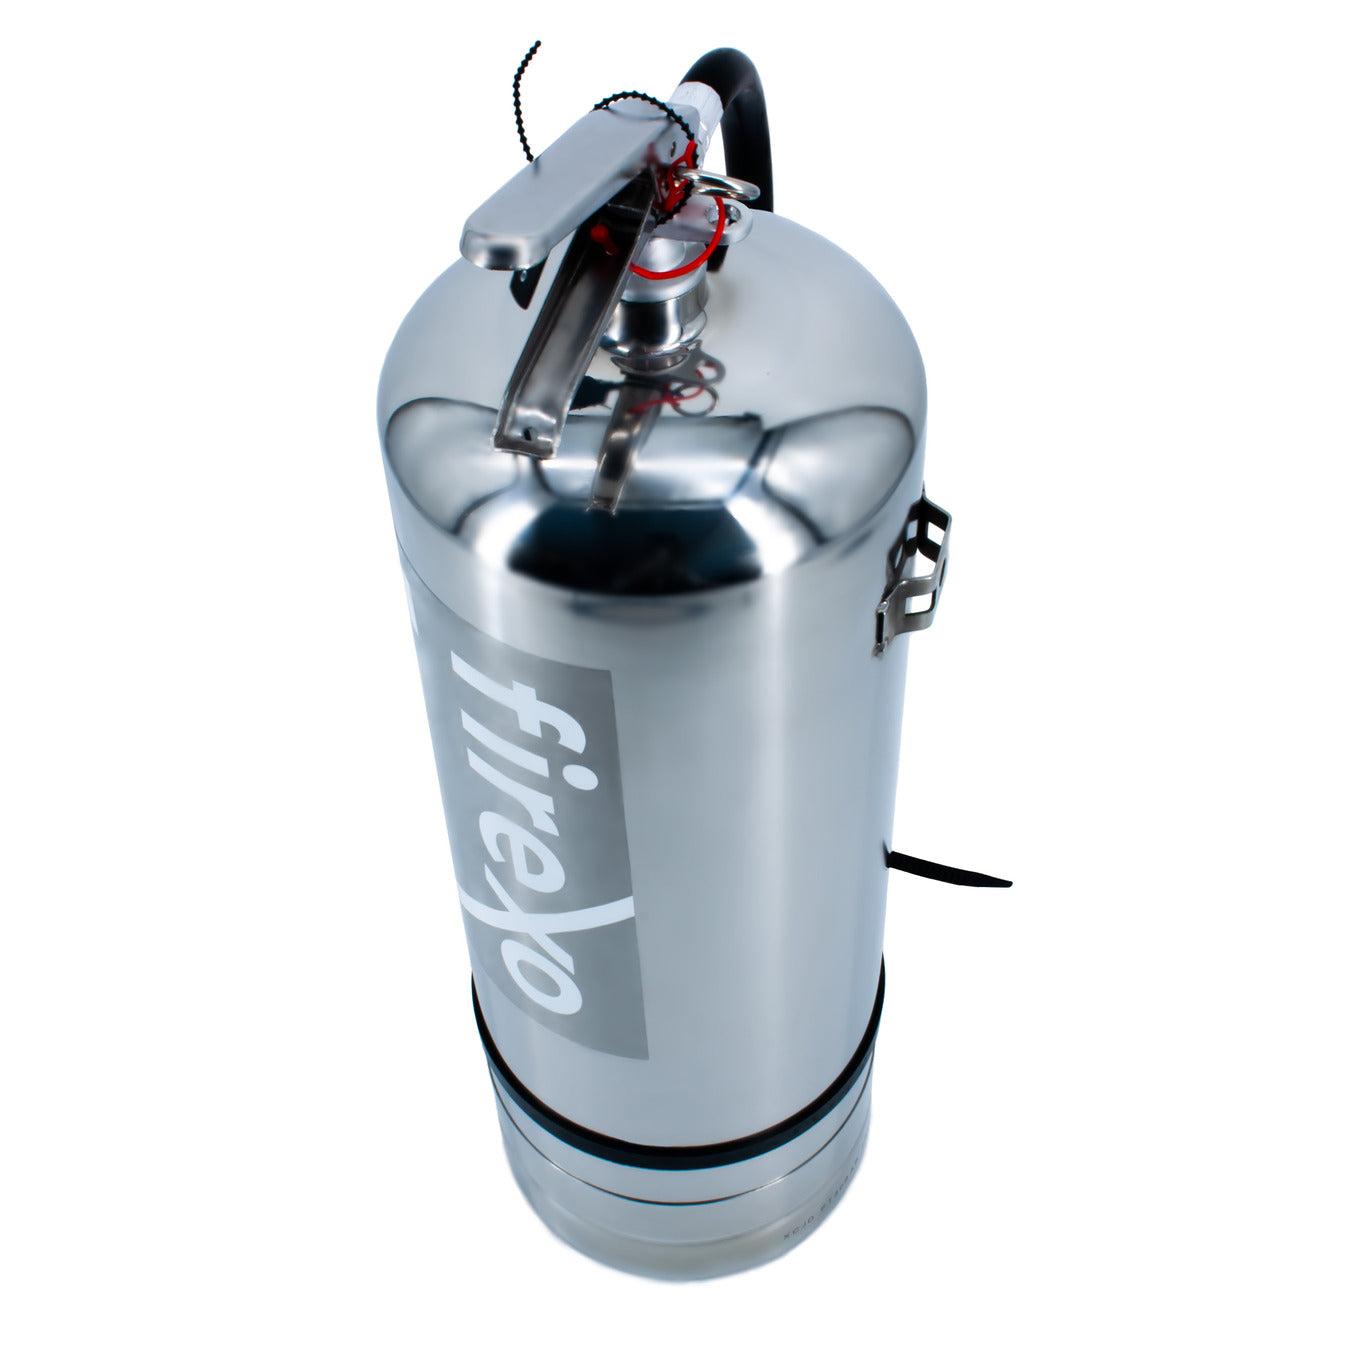 Firexo Stainless Steel 9 Litre Fire Extinguisher